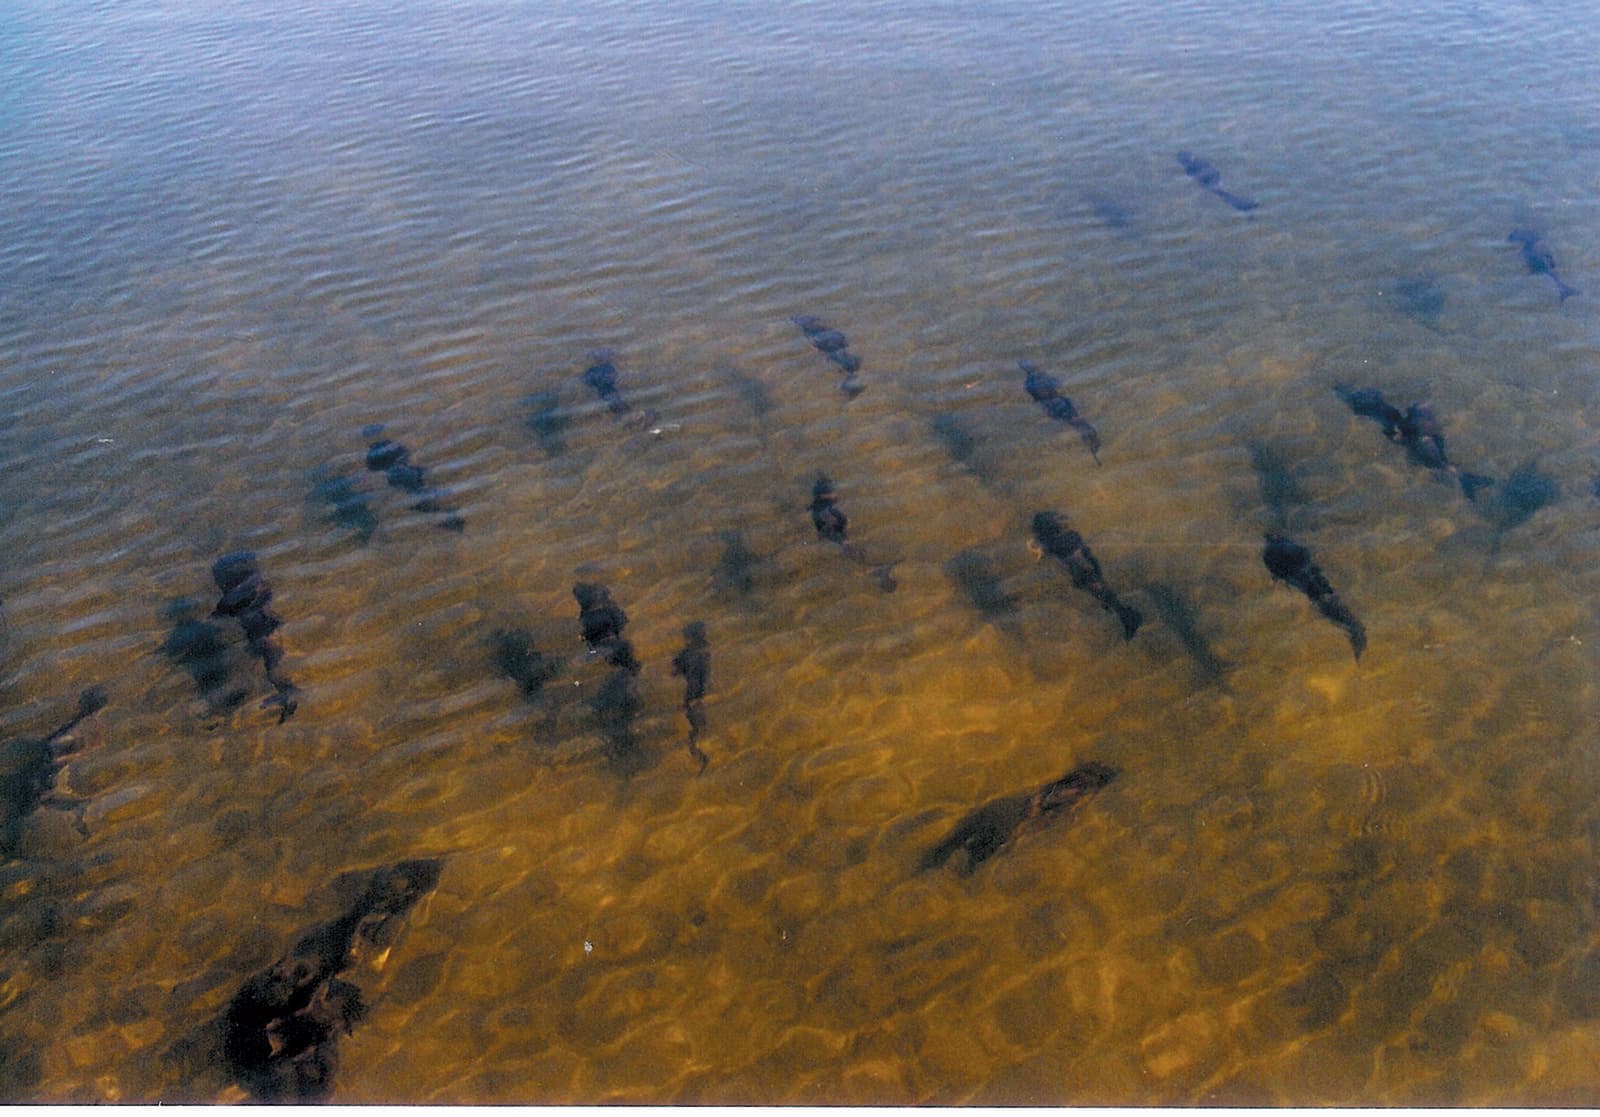 cluster of large fish swimming in shallow water